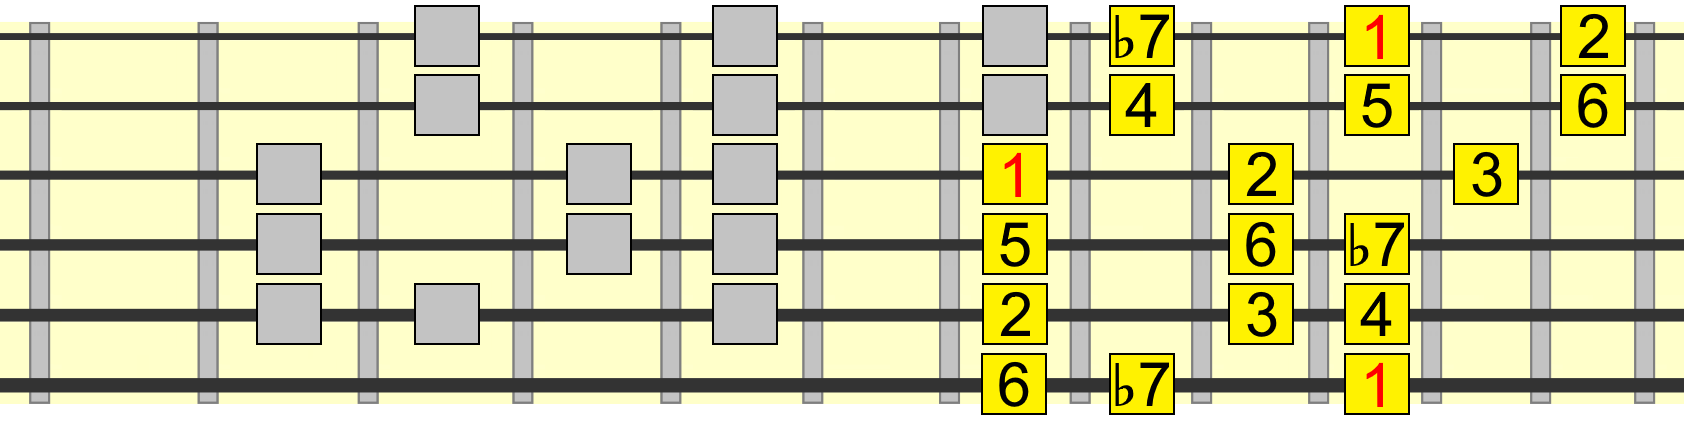 extended 5 chord mixolydian blues pattern